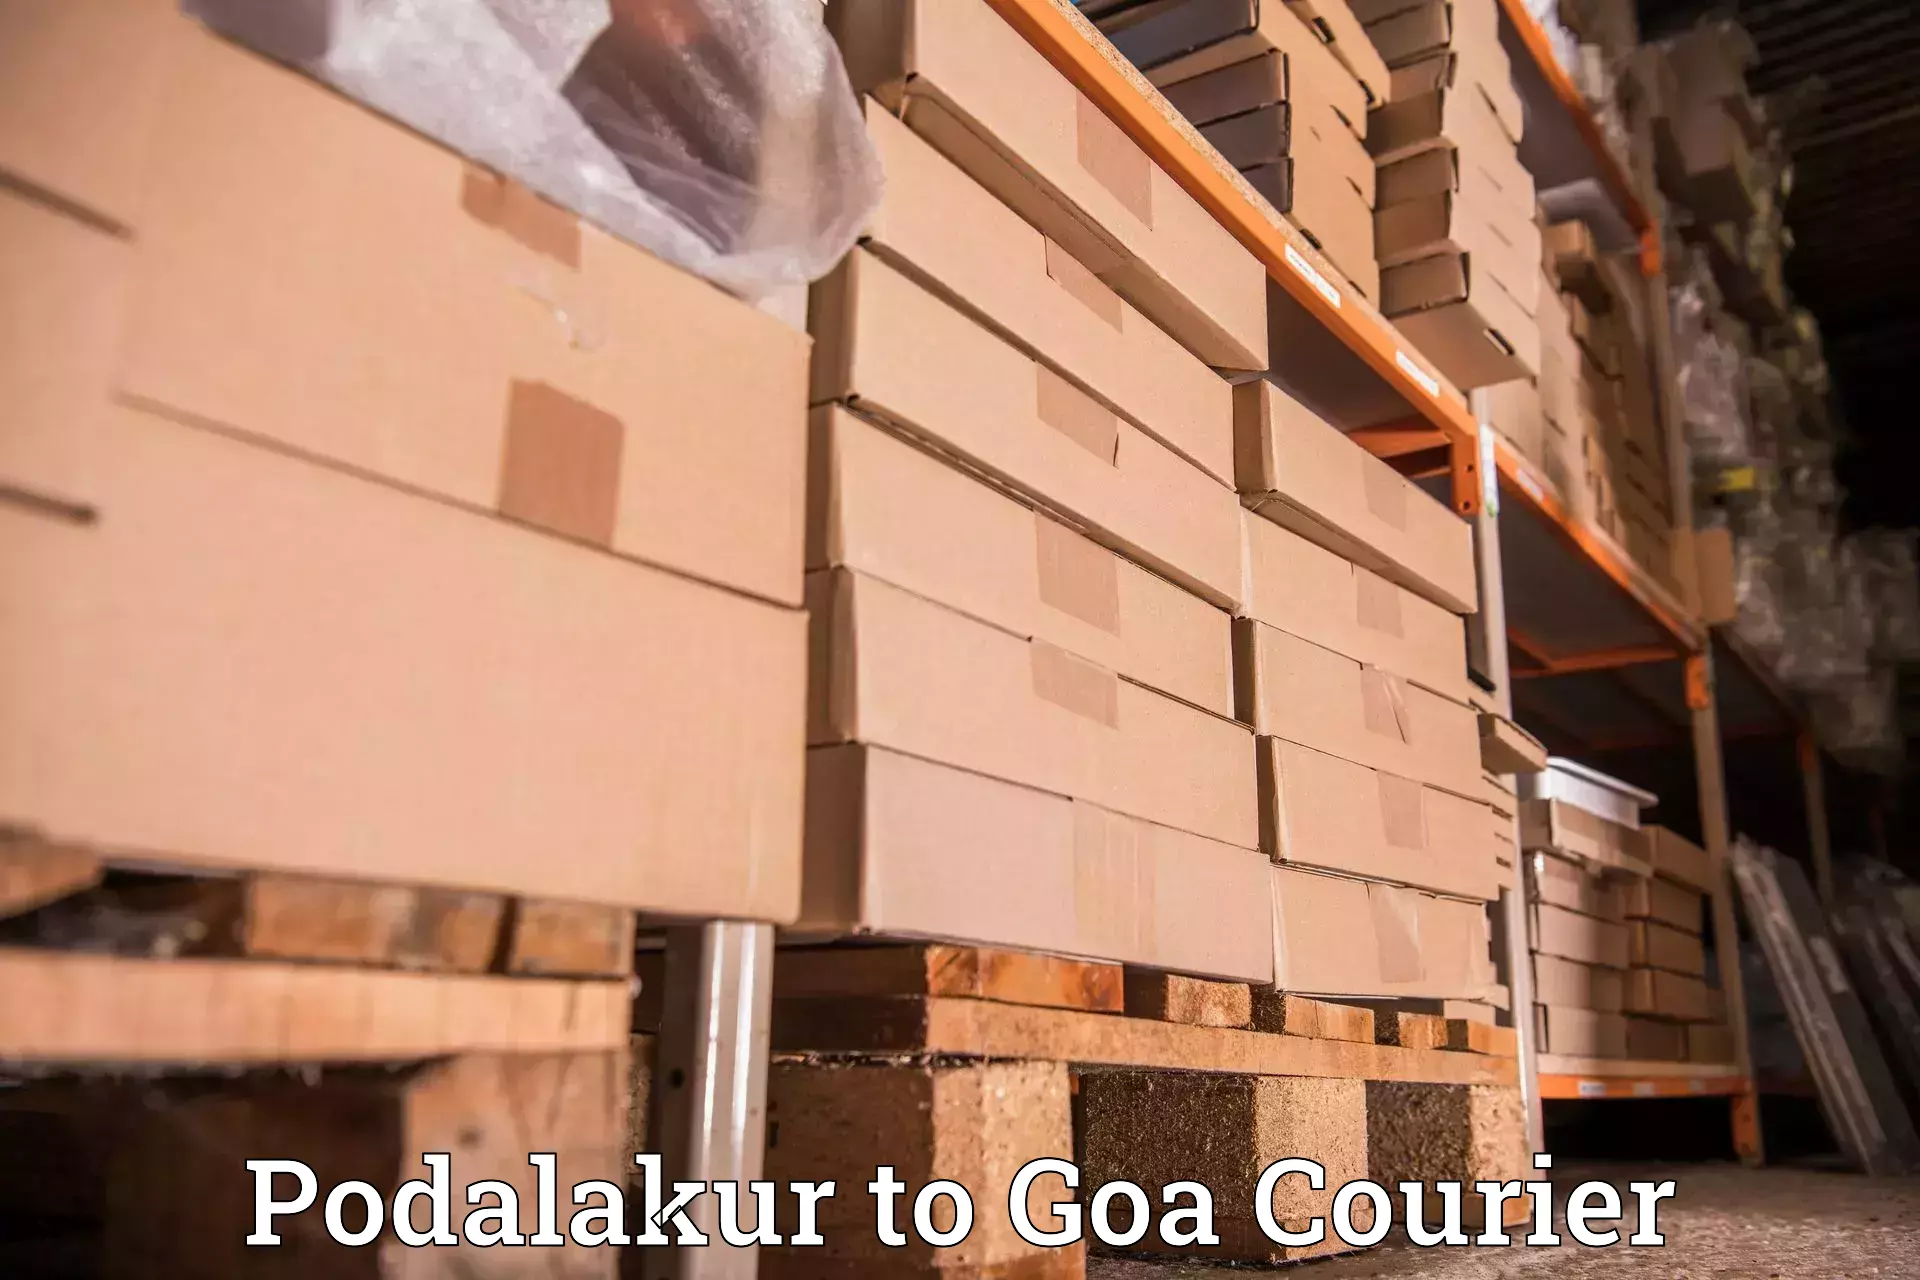 Multi-national courier services Podalakur to Panaji